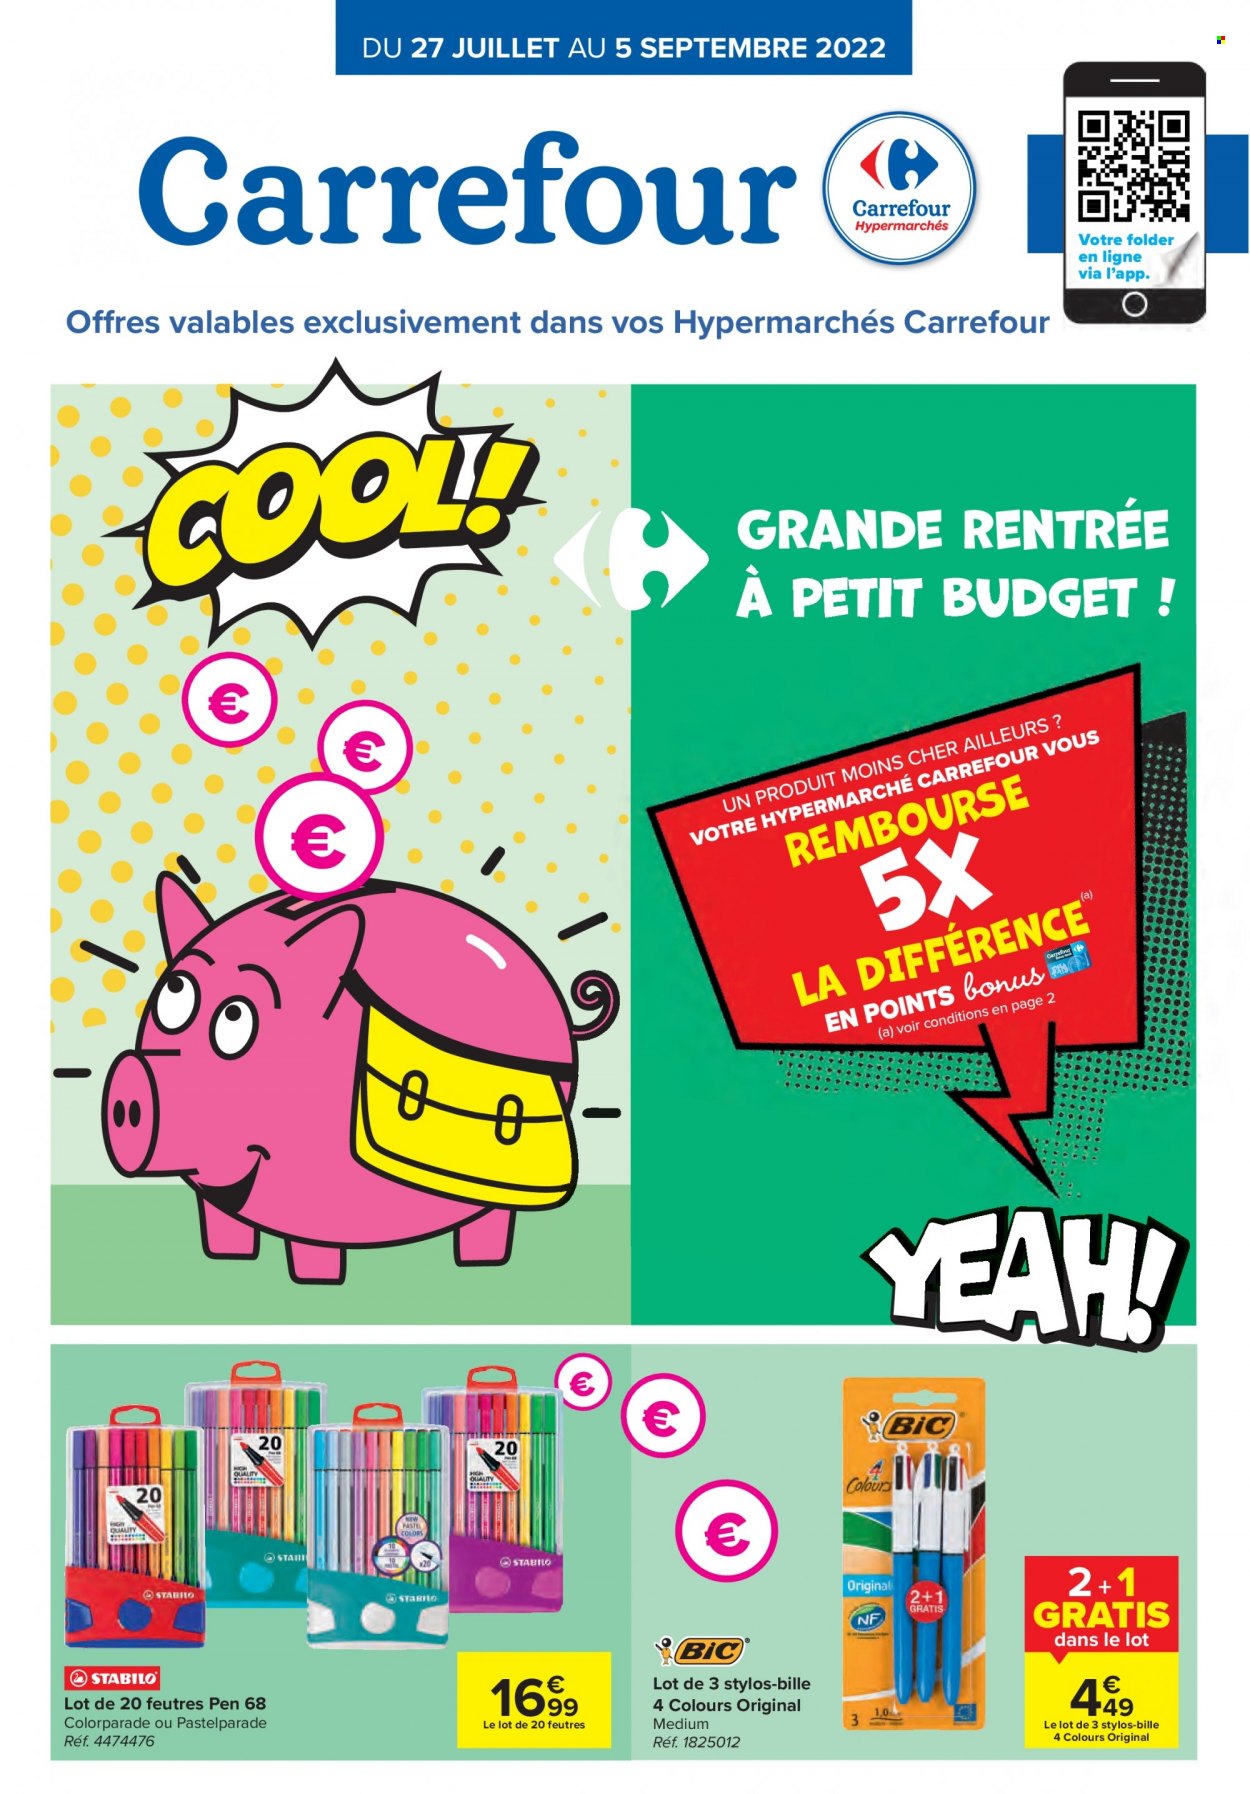 Catalogue Carrefour hypermarkt - 27.7.2022 - 5.9.2022. Page 1.